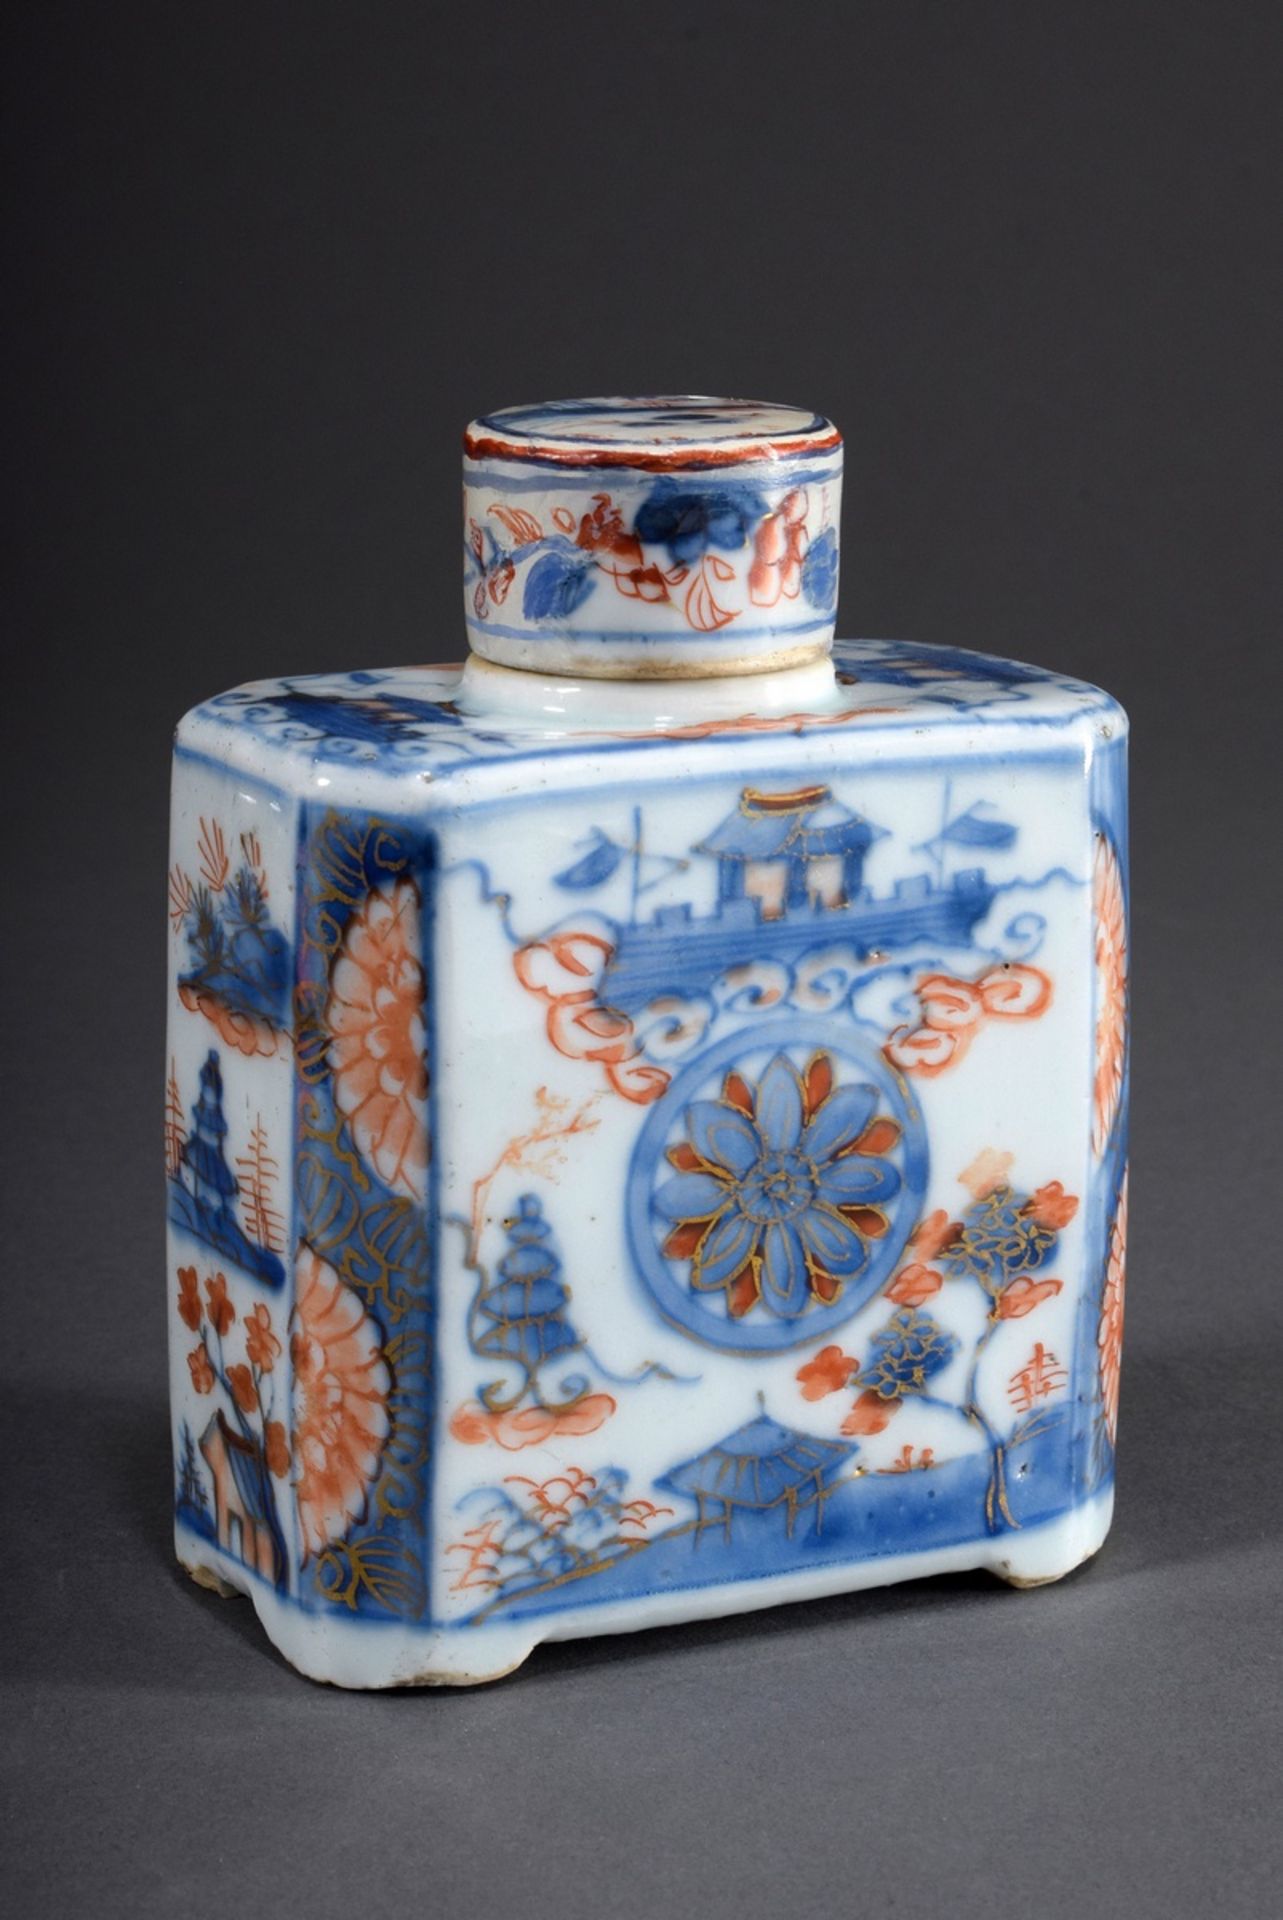 Chinesische Porzellan Teedose in eckiger Form mi | Chinese porcelain tea caddy in angular form with